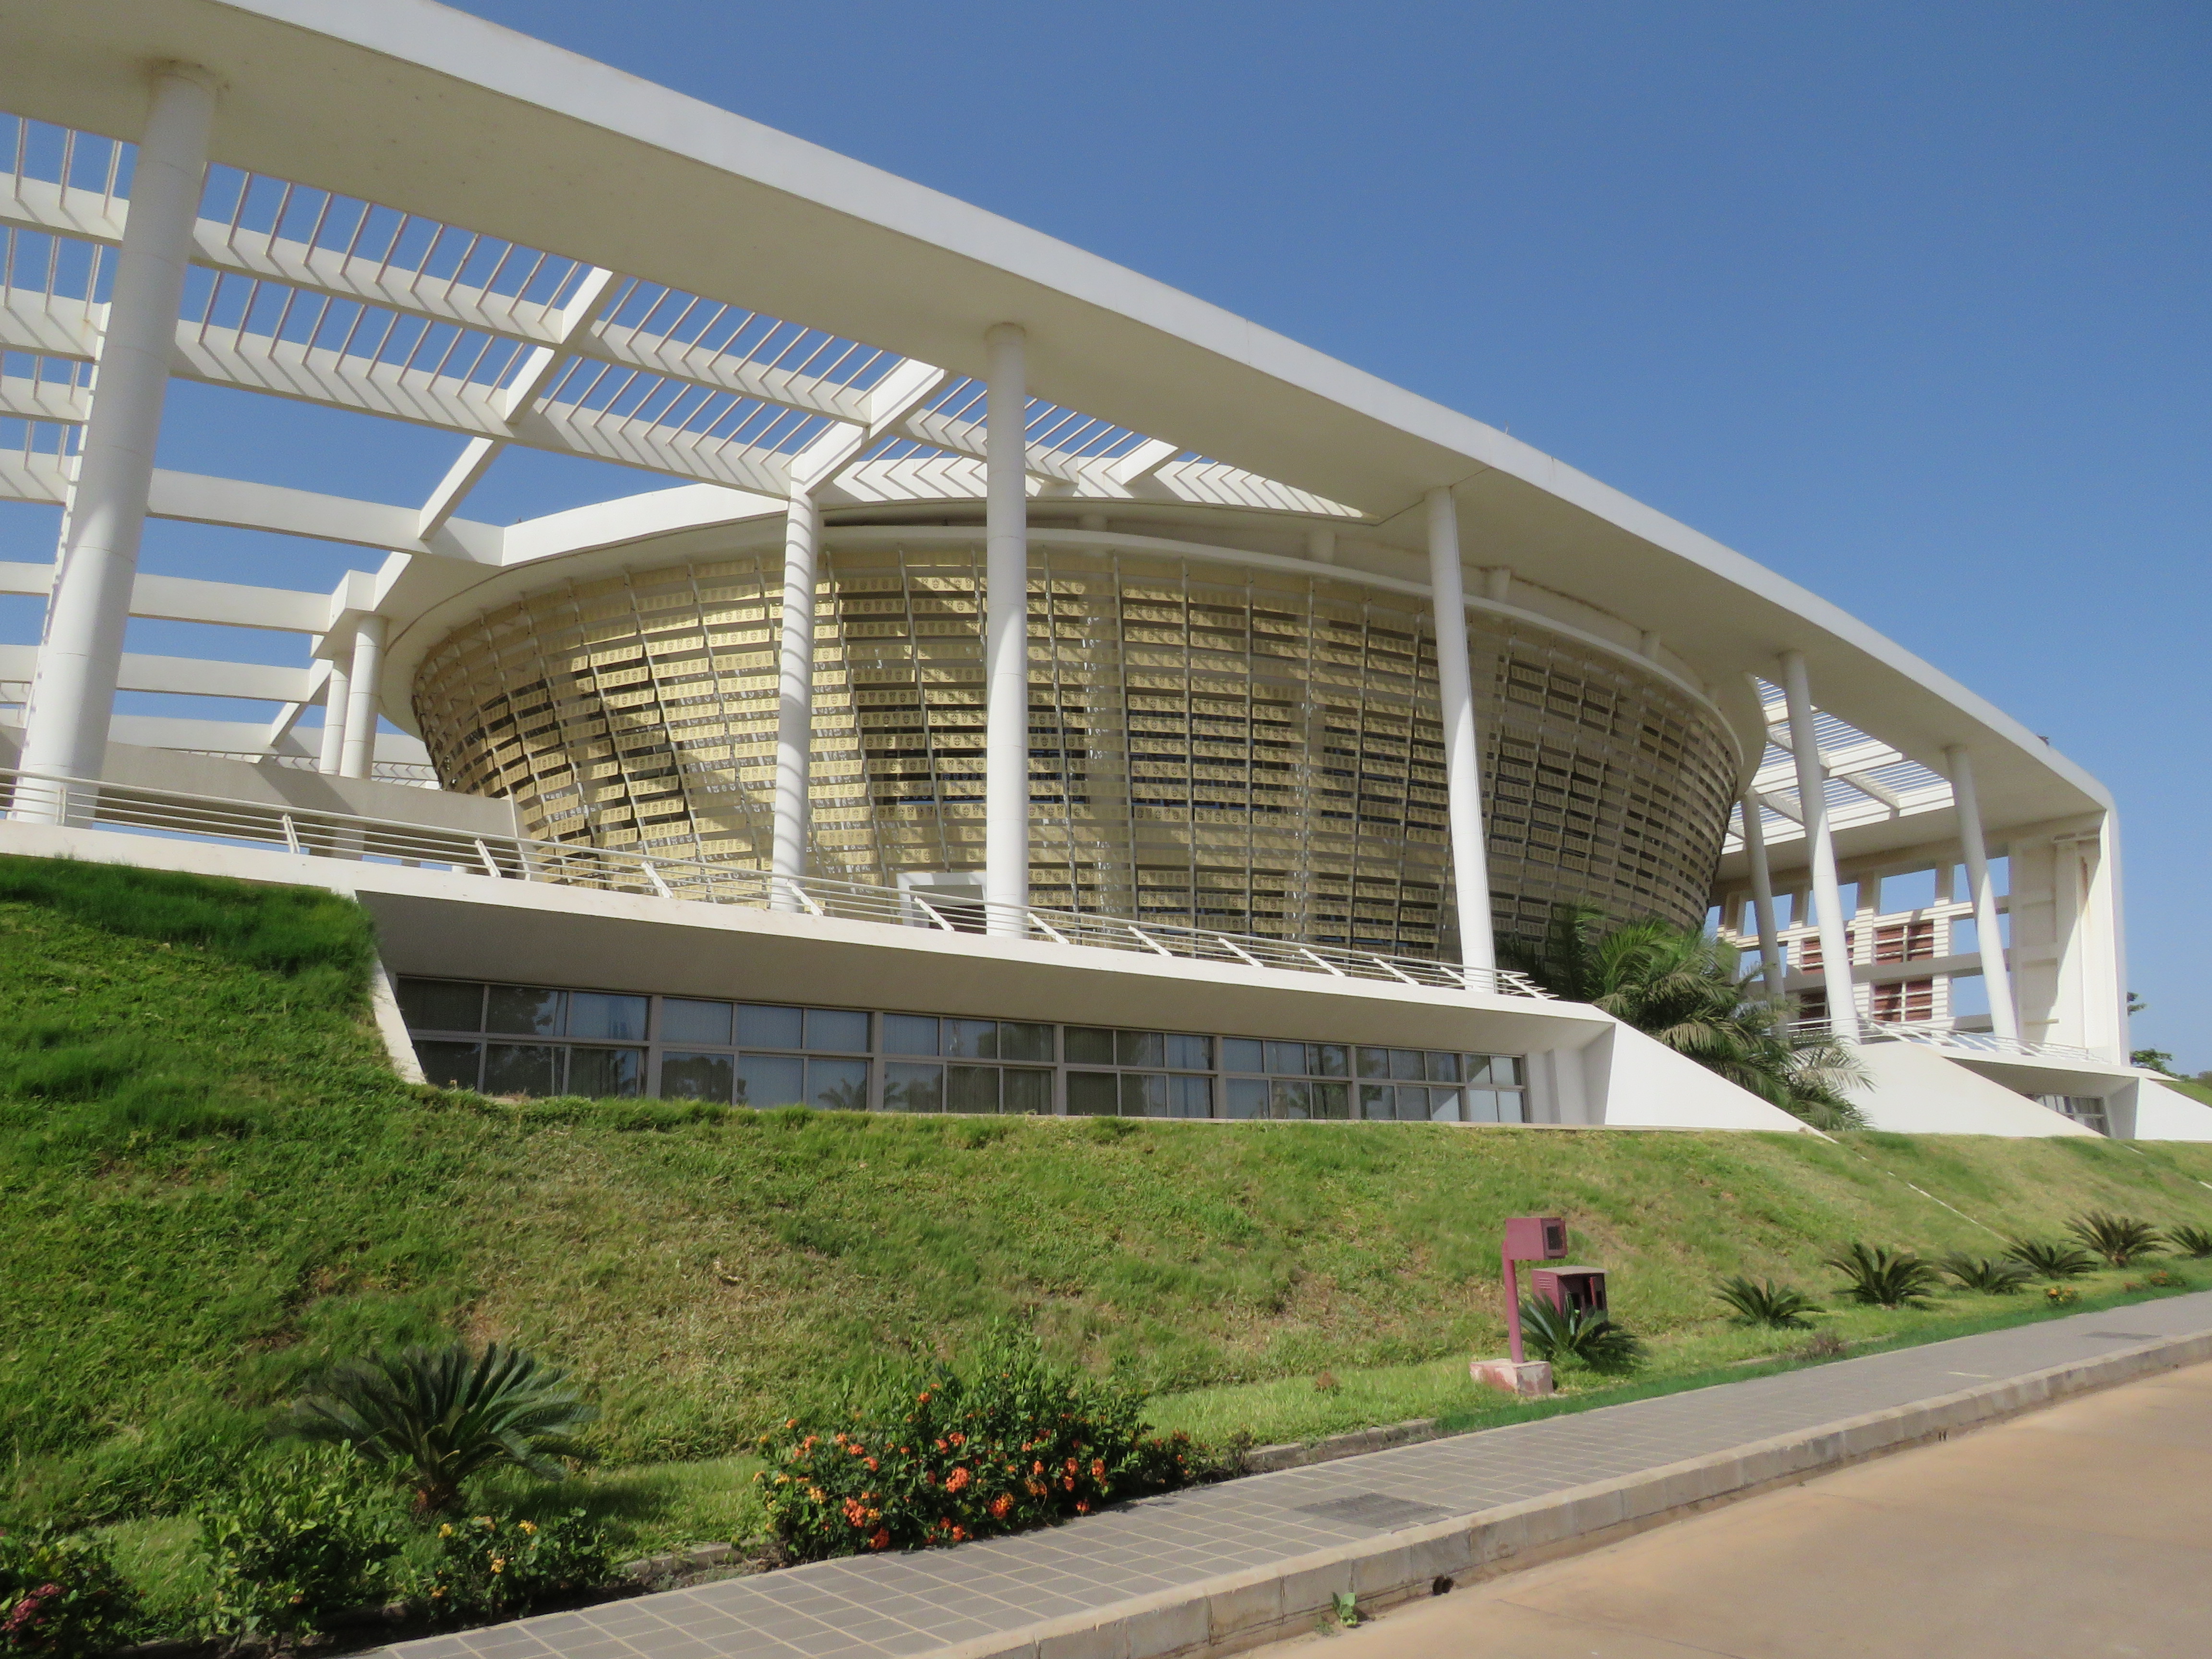 The National Assembly, Banjul, The Gambia